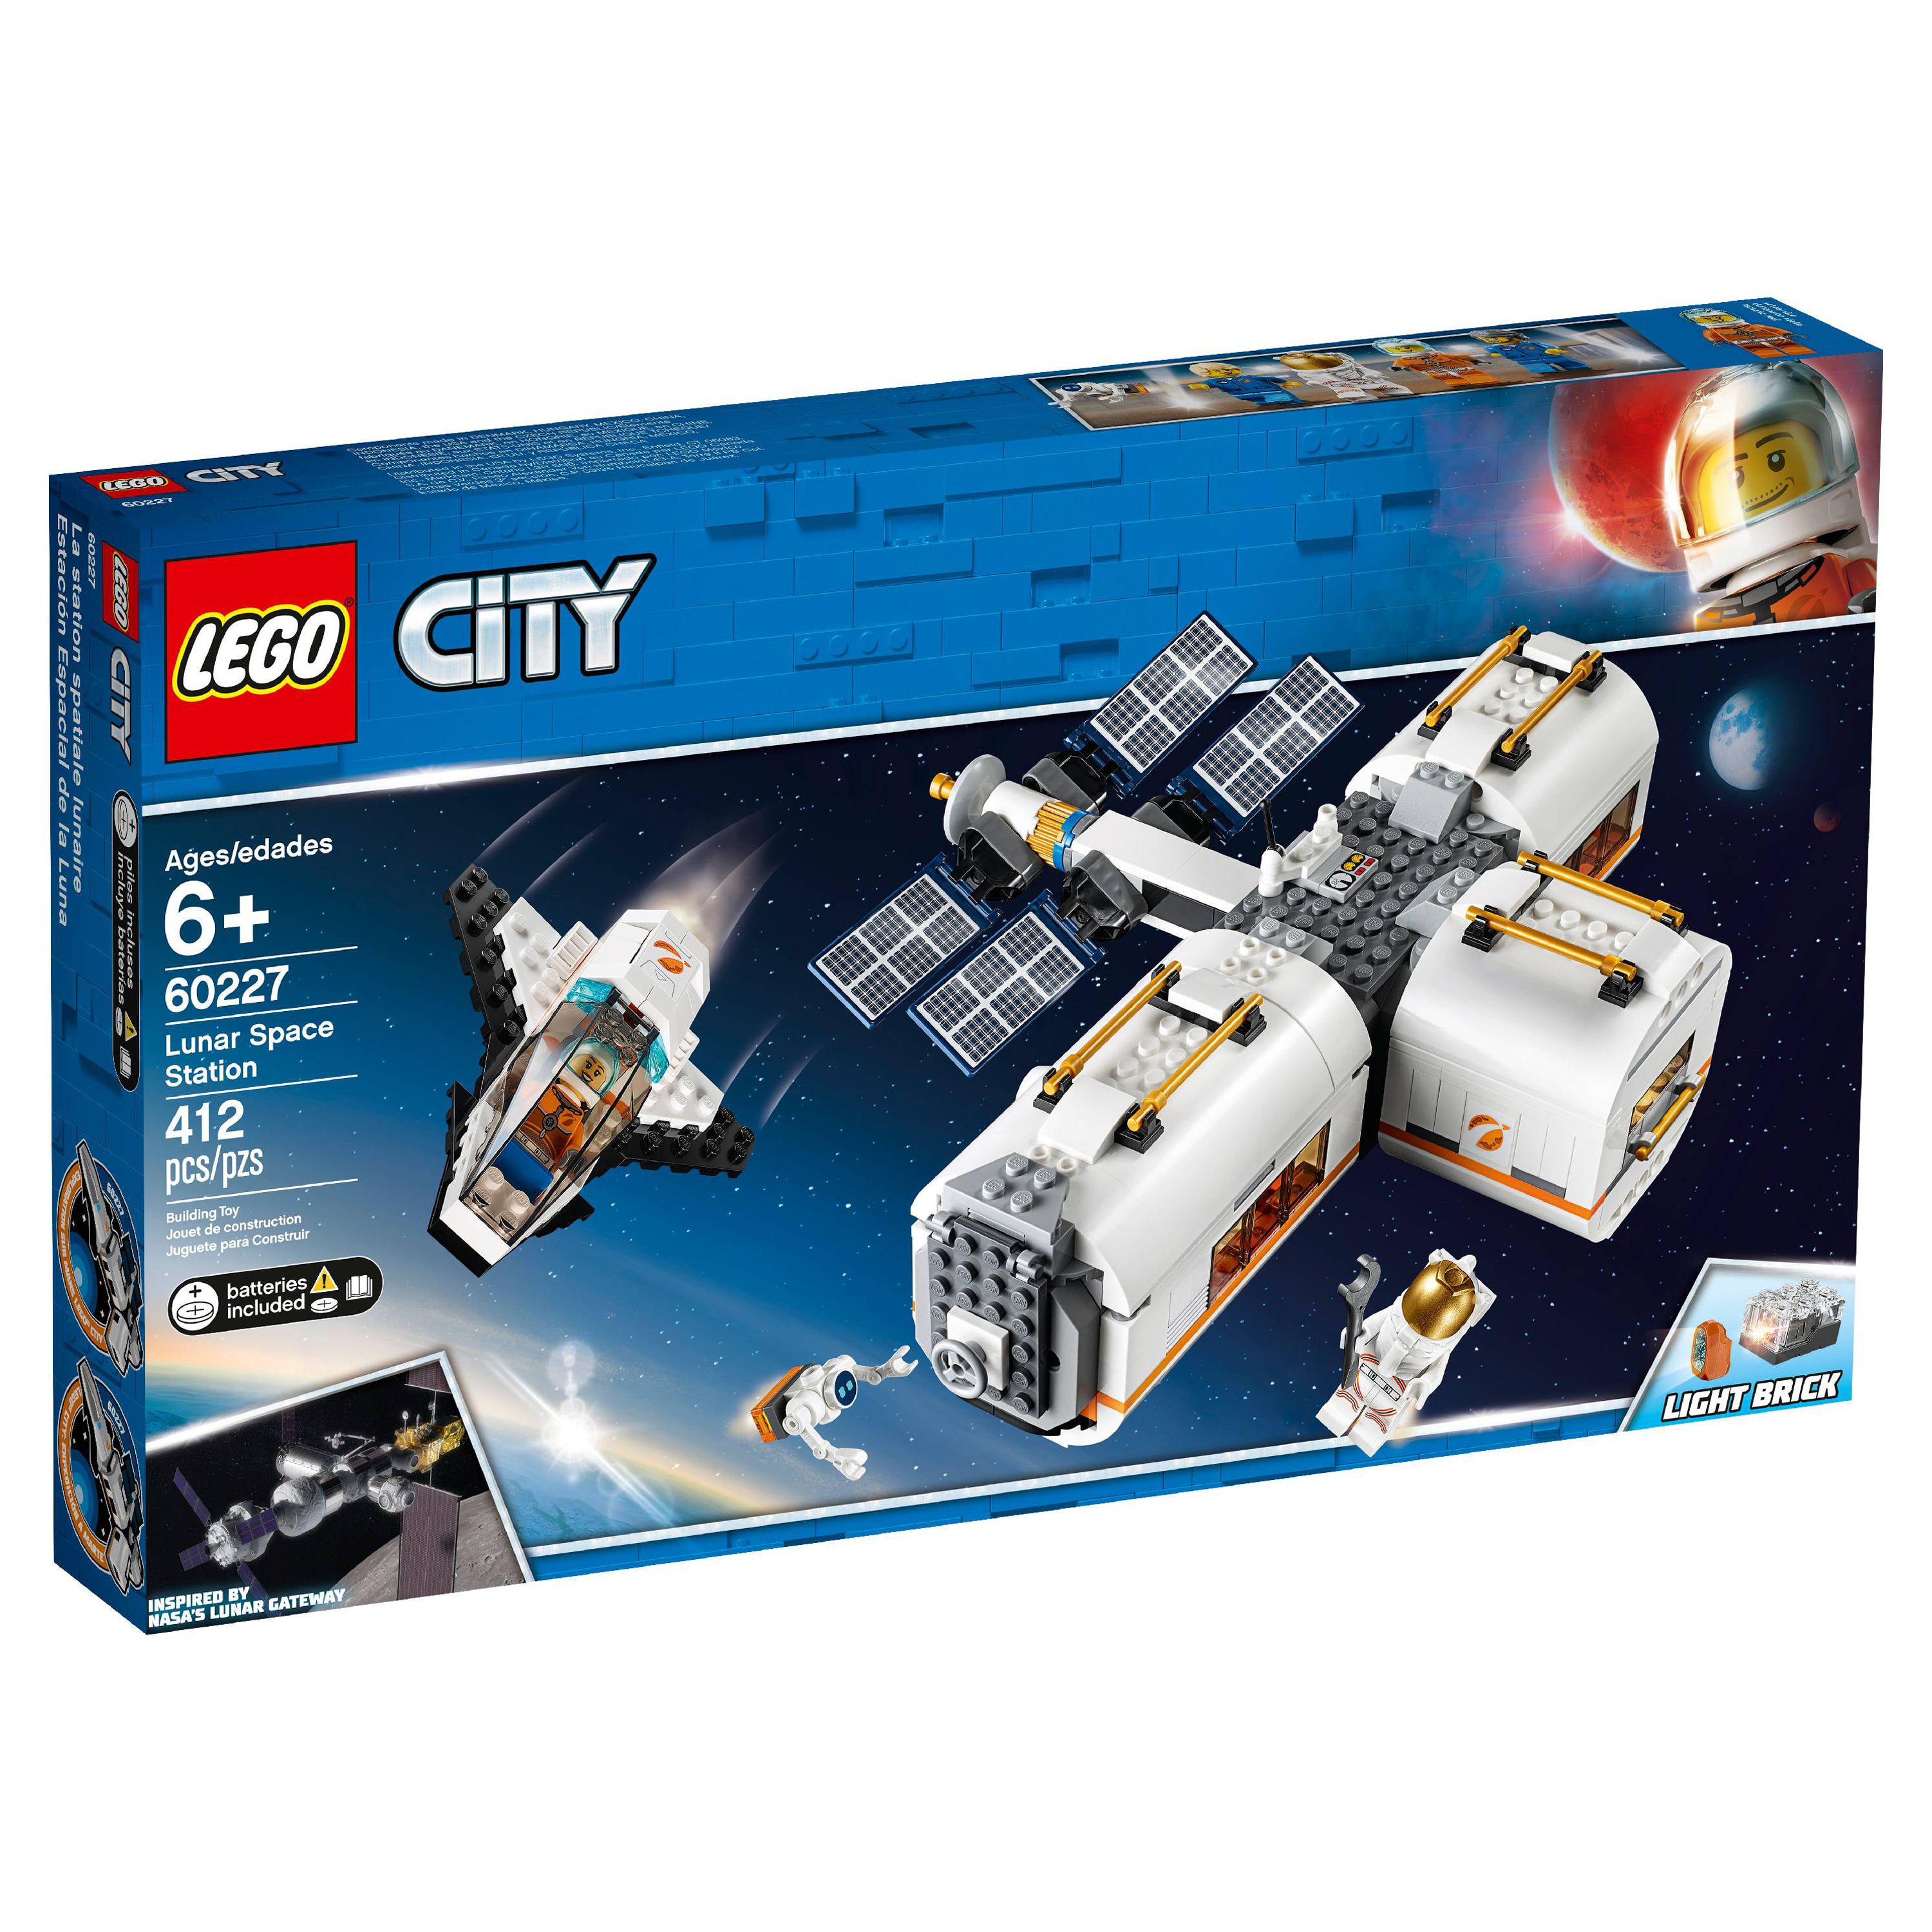 LEGO City Space Lunar Space Station 60227 Building Set with Toy Shuttle - image 5 of 8